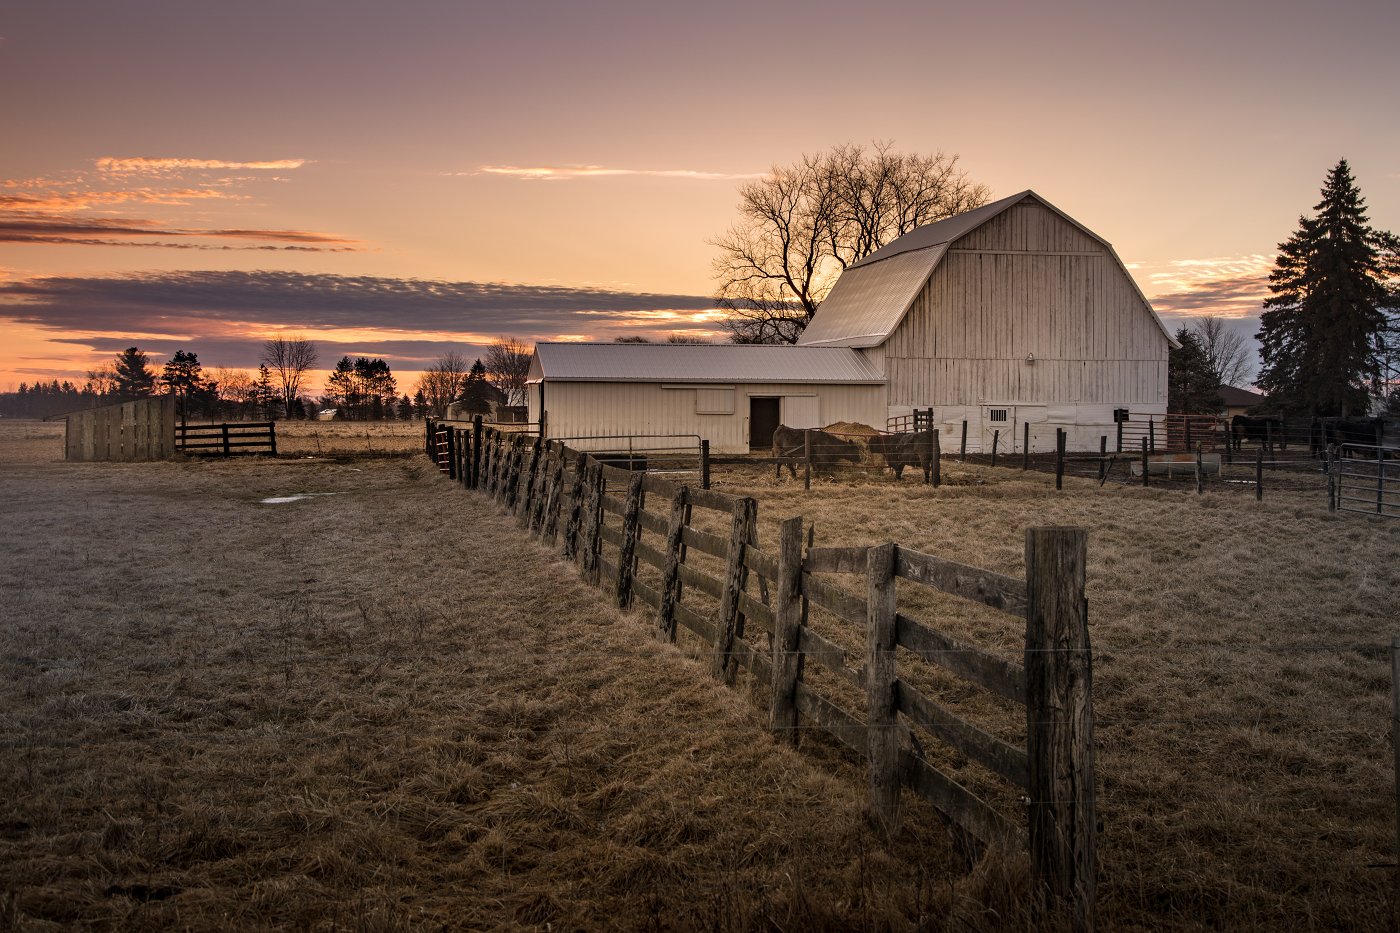 Title: farm scene | Author: Christian Collins | Source: Own Work | License: CC BY-SA 2.0